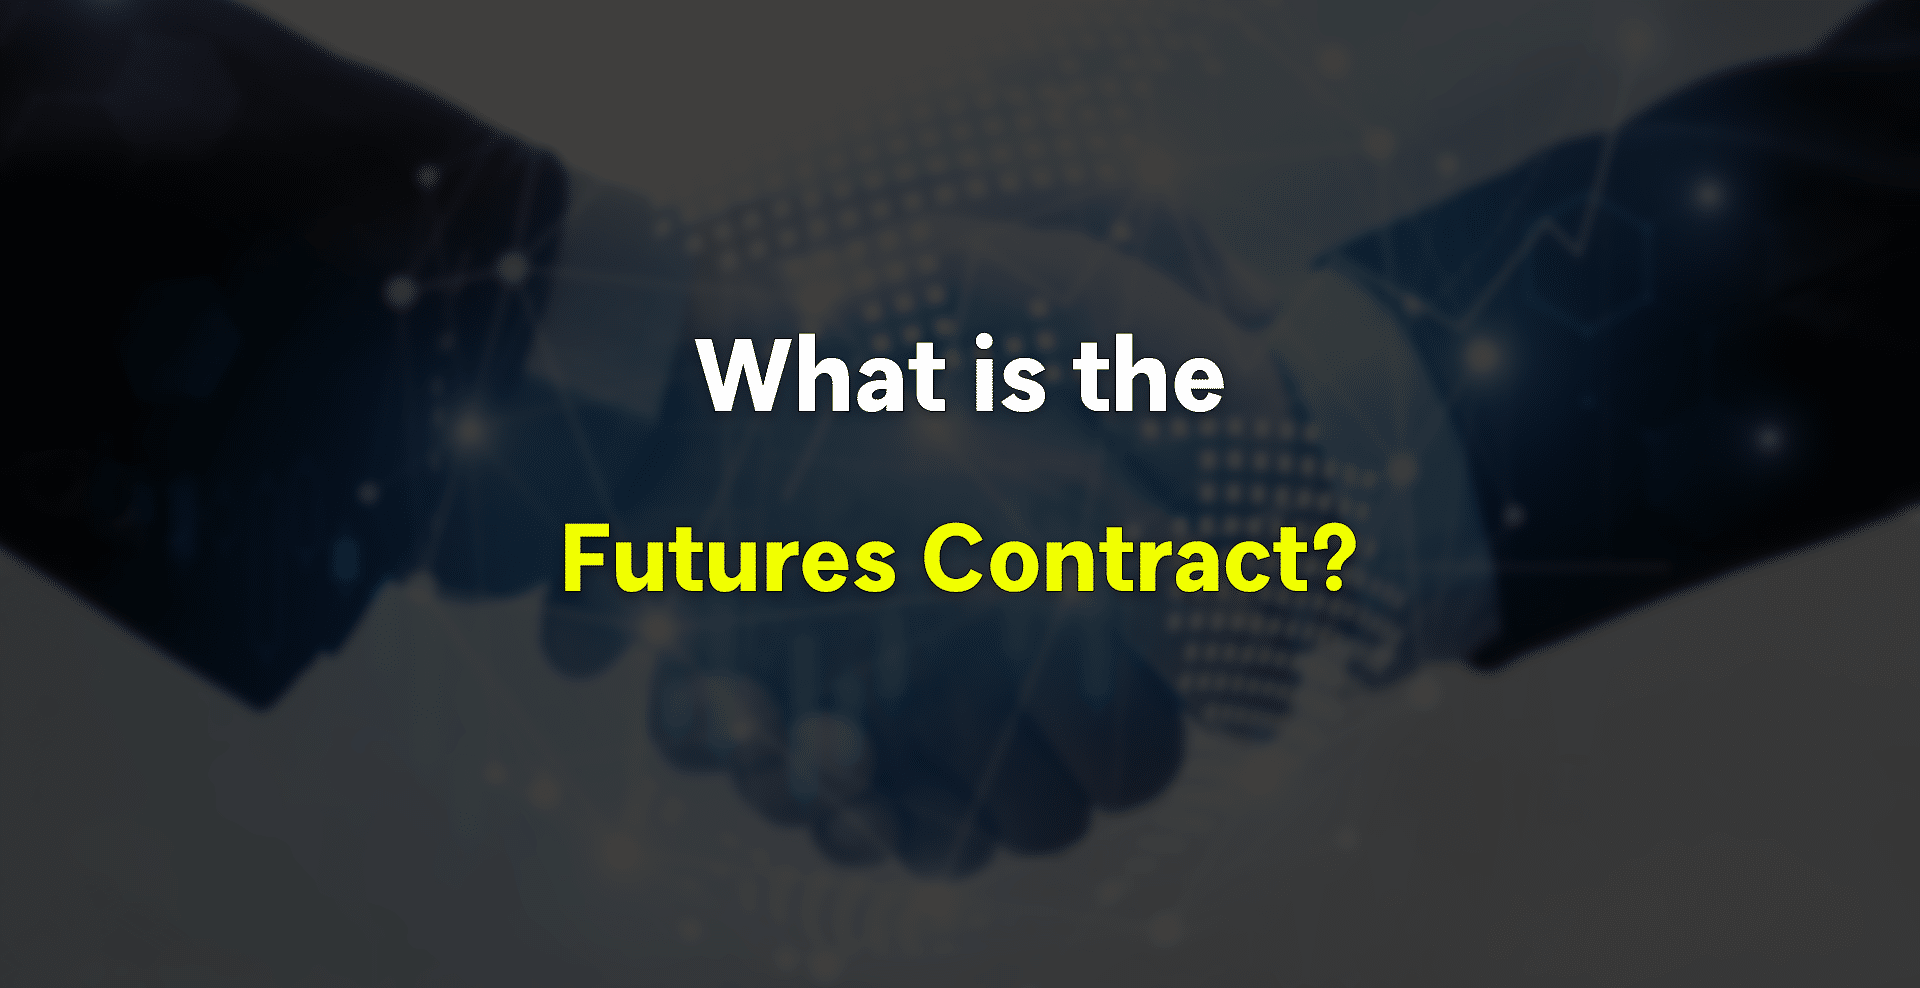 What is futures contract